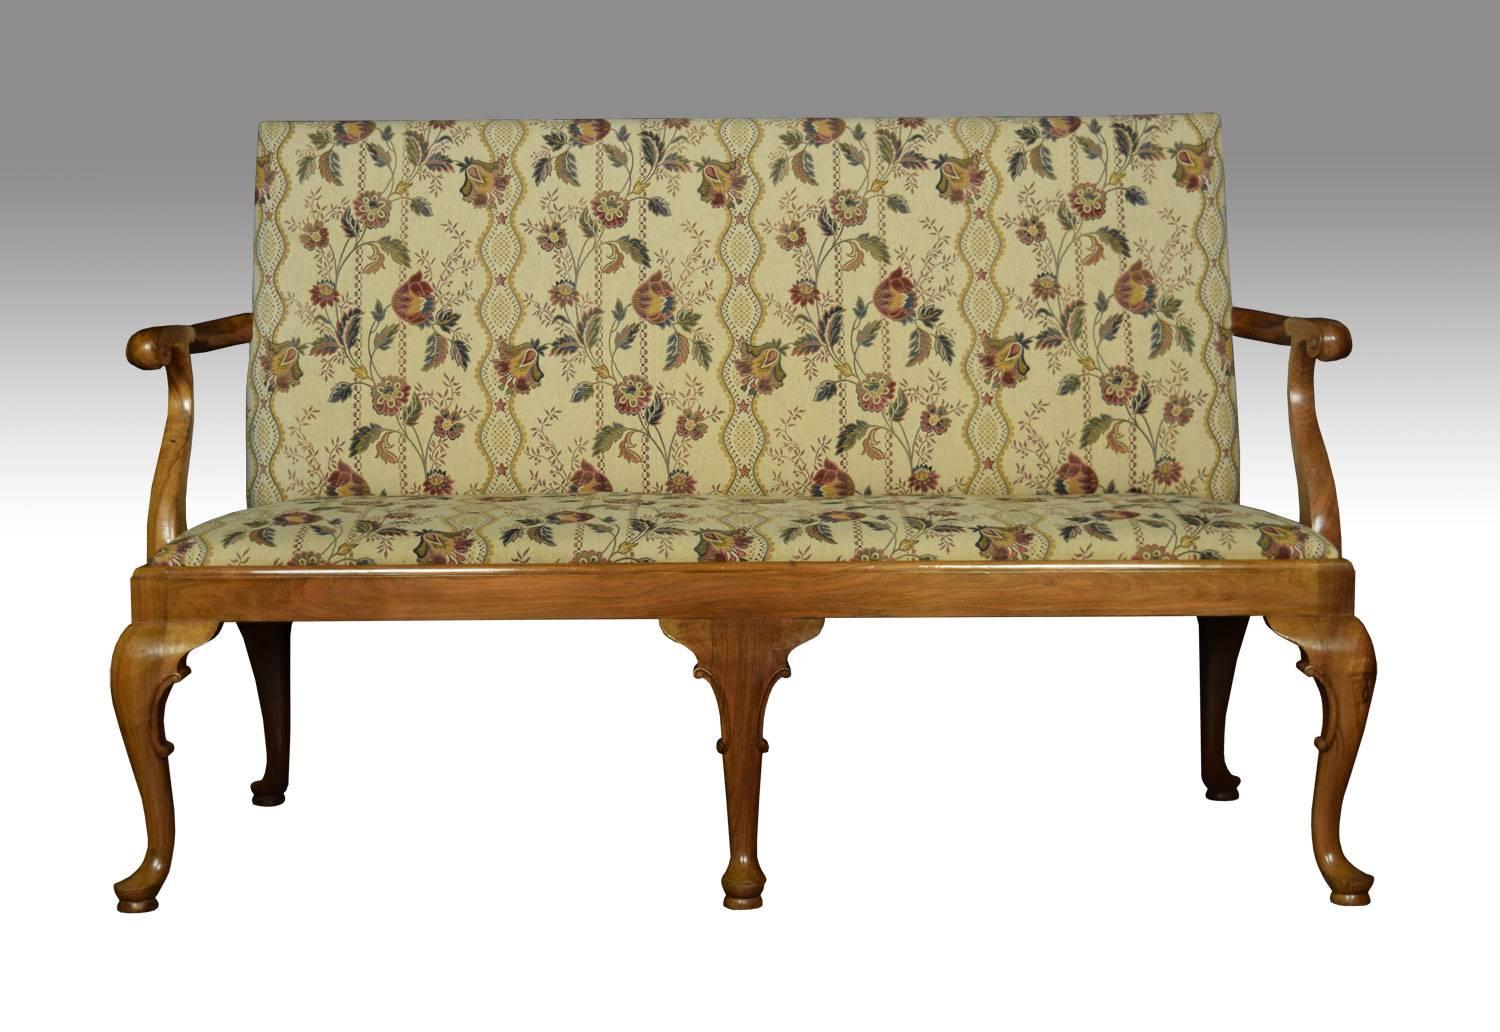 Pair of walnut framed settees, having rectangular upholstered back and seat flanked by scrolling arms. All raised up on cabriole legs terminating in pad feet.
Dimensions
Height 40 inches height to seat 18 inches
Width 64 Inches
Depth 29 Inches.